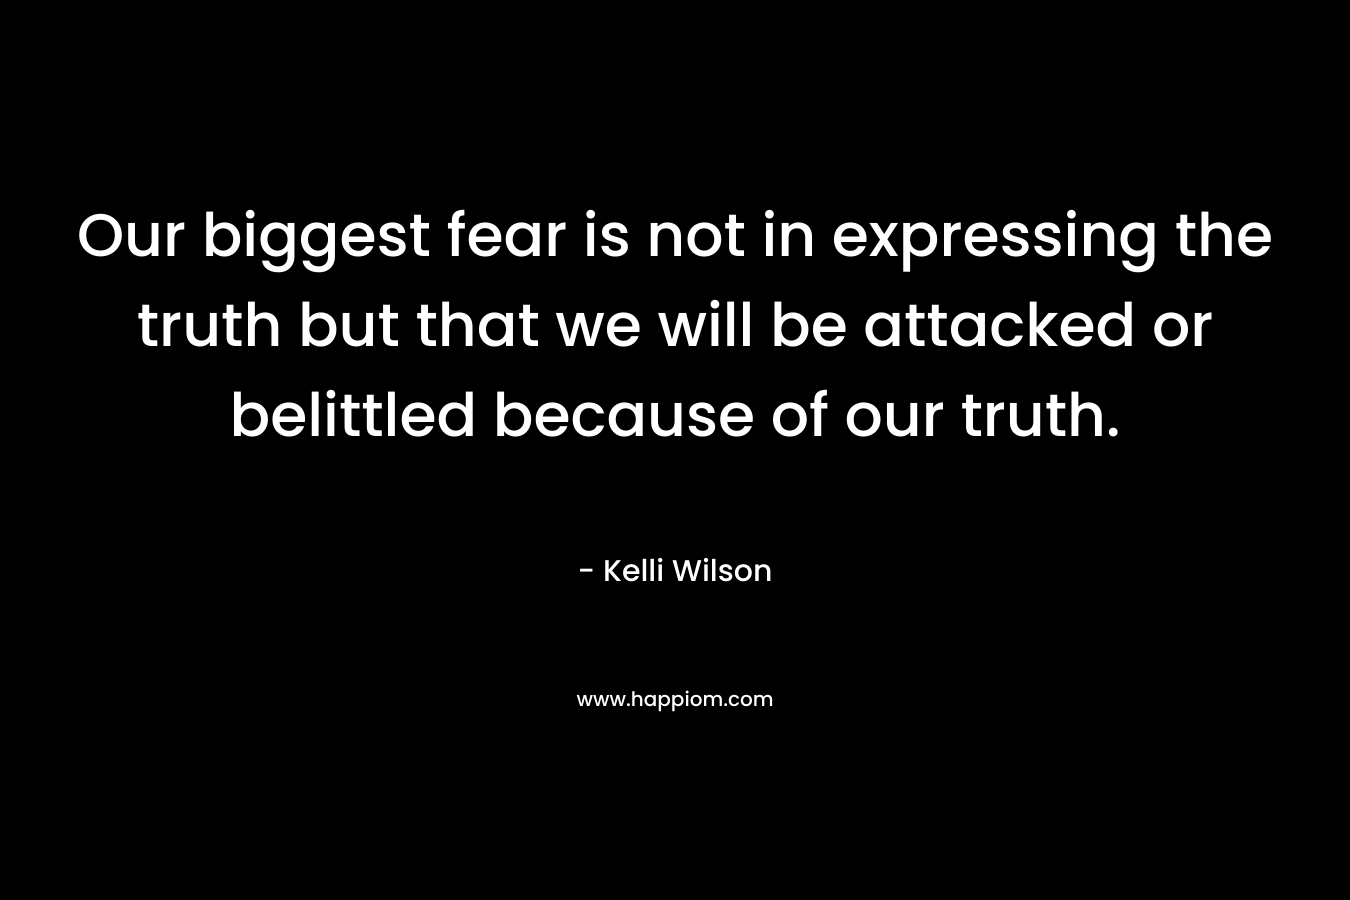 Our biggest fear is not in expressing the truth but that we will be attacked or belittled because of our truth. – Kelli Wilson